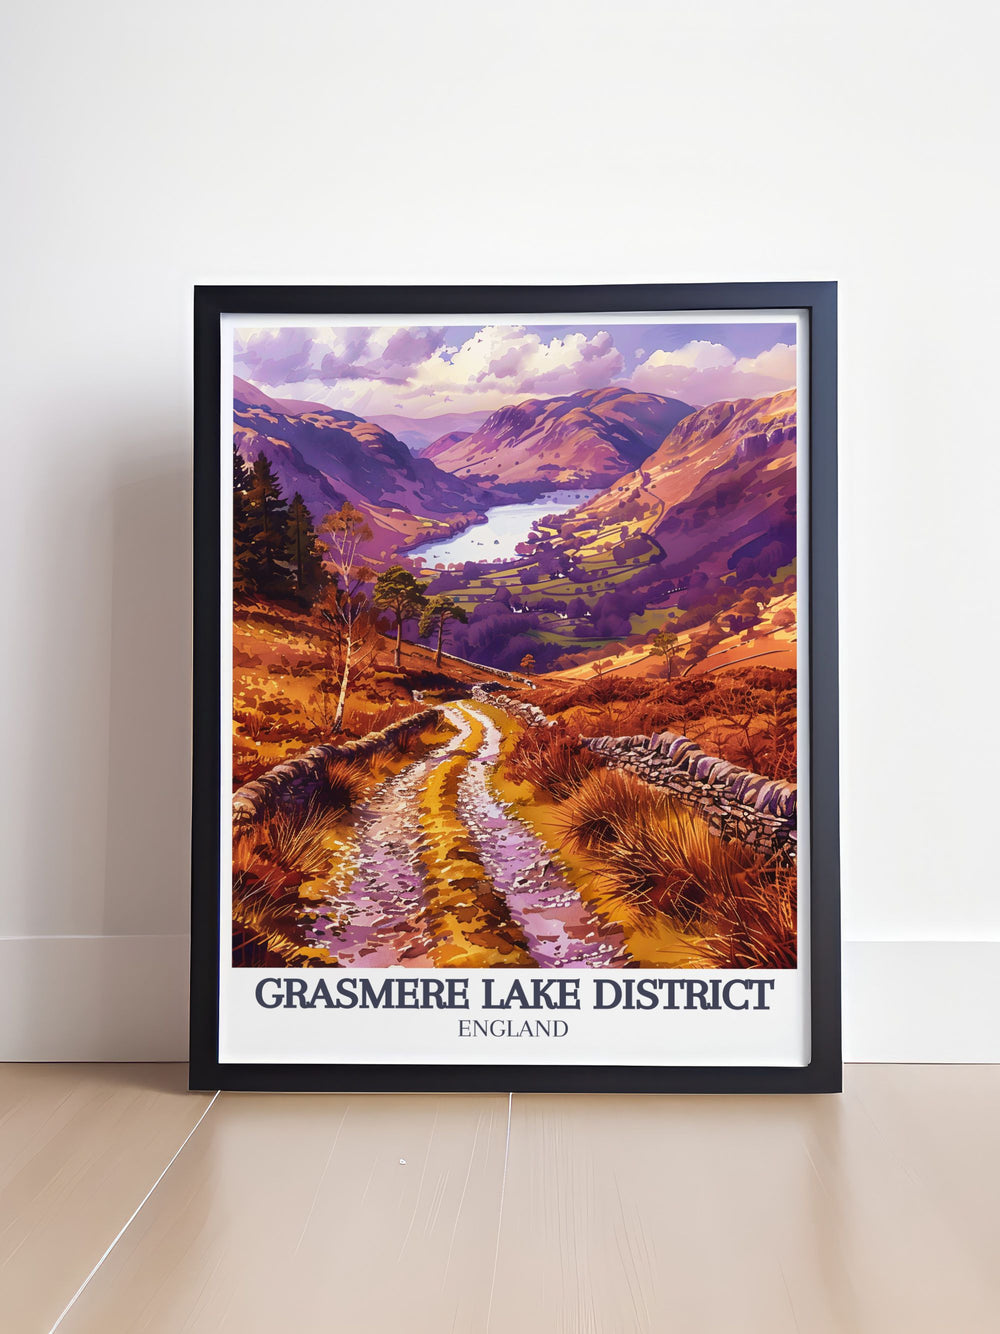 Capturing the picturesque scenery of Grasmere in the Lake District, this poster highlights the serene lake and the historic Coffin Route, ideal for any travel enthusiasts wall art collection.